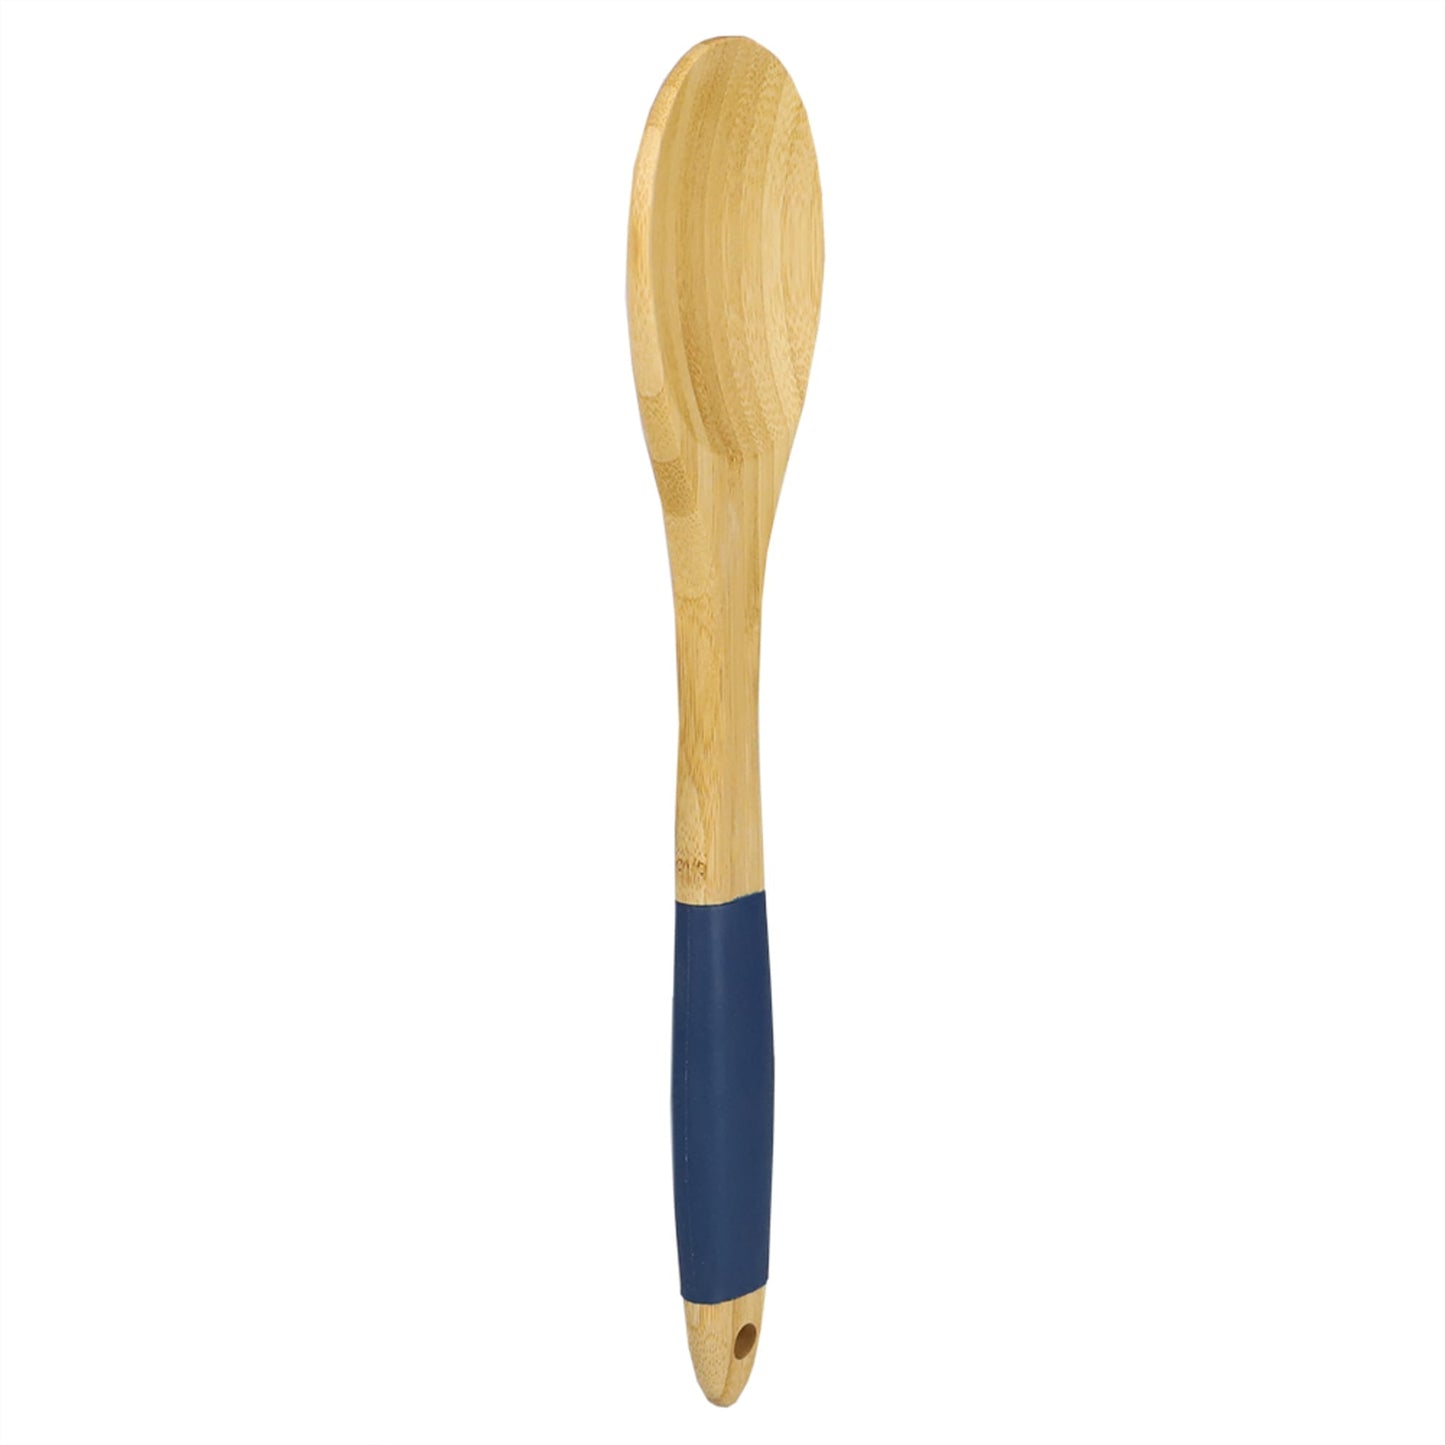 Michael Graves Design Bamboo Serving Spoon with Indigo Silicone Handle